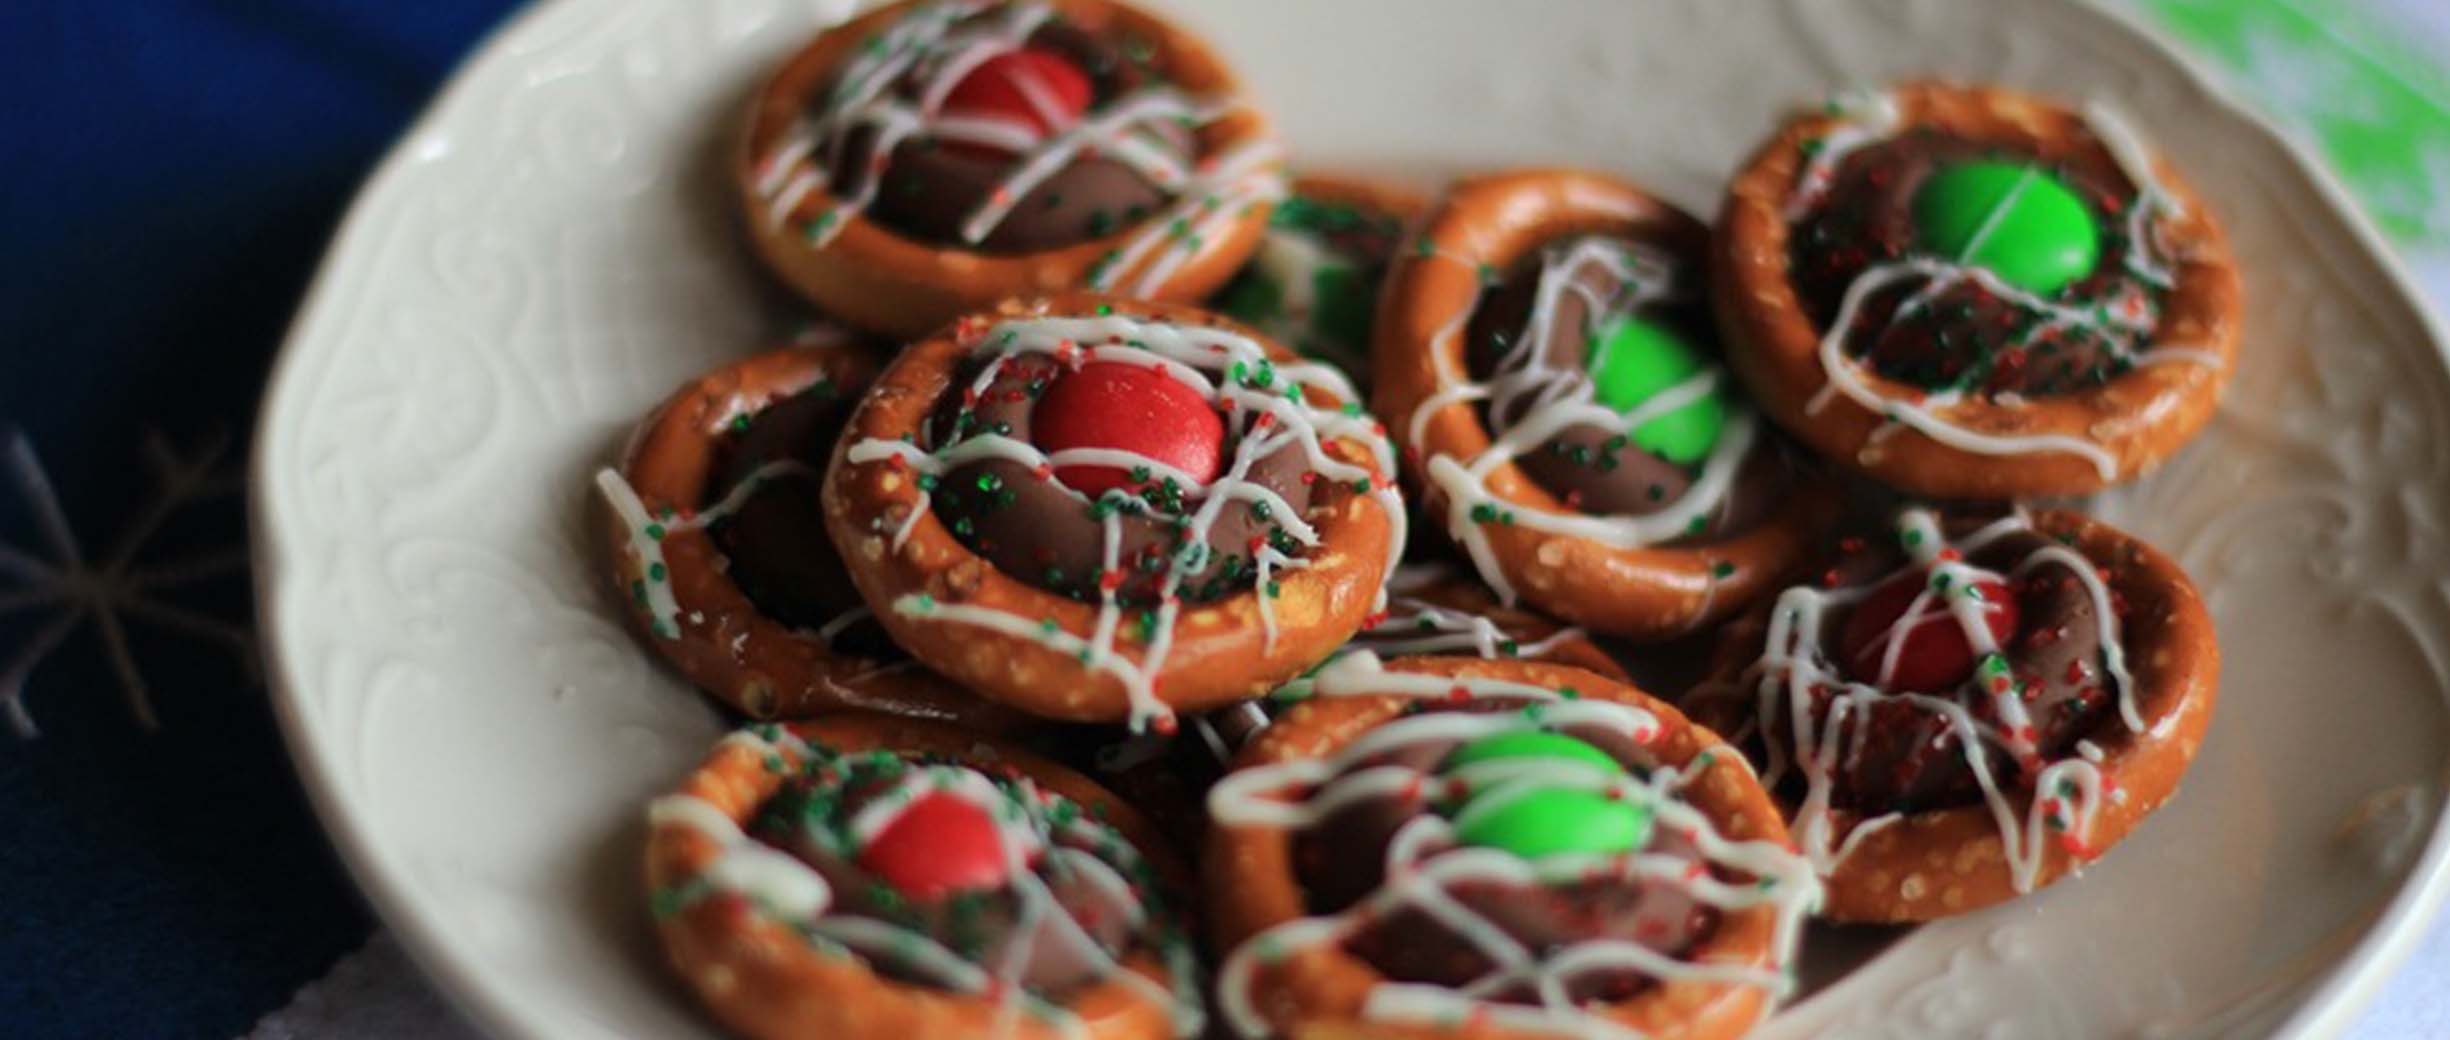 Holiday Dishes So Easy Your Kids Can Help Make